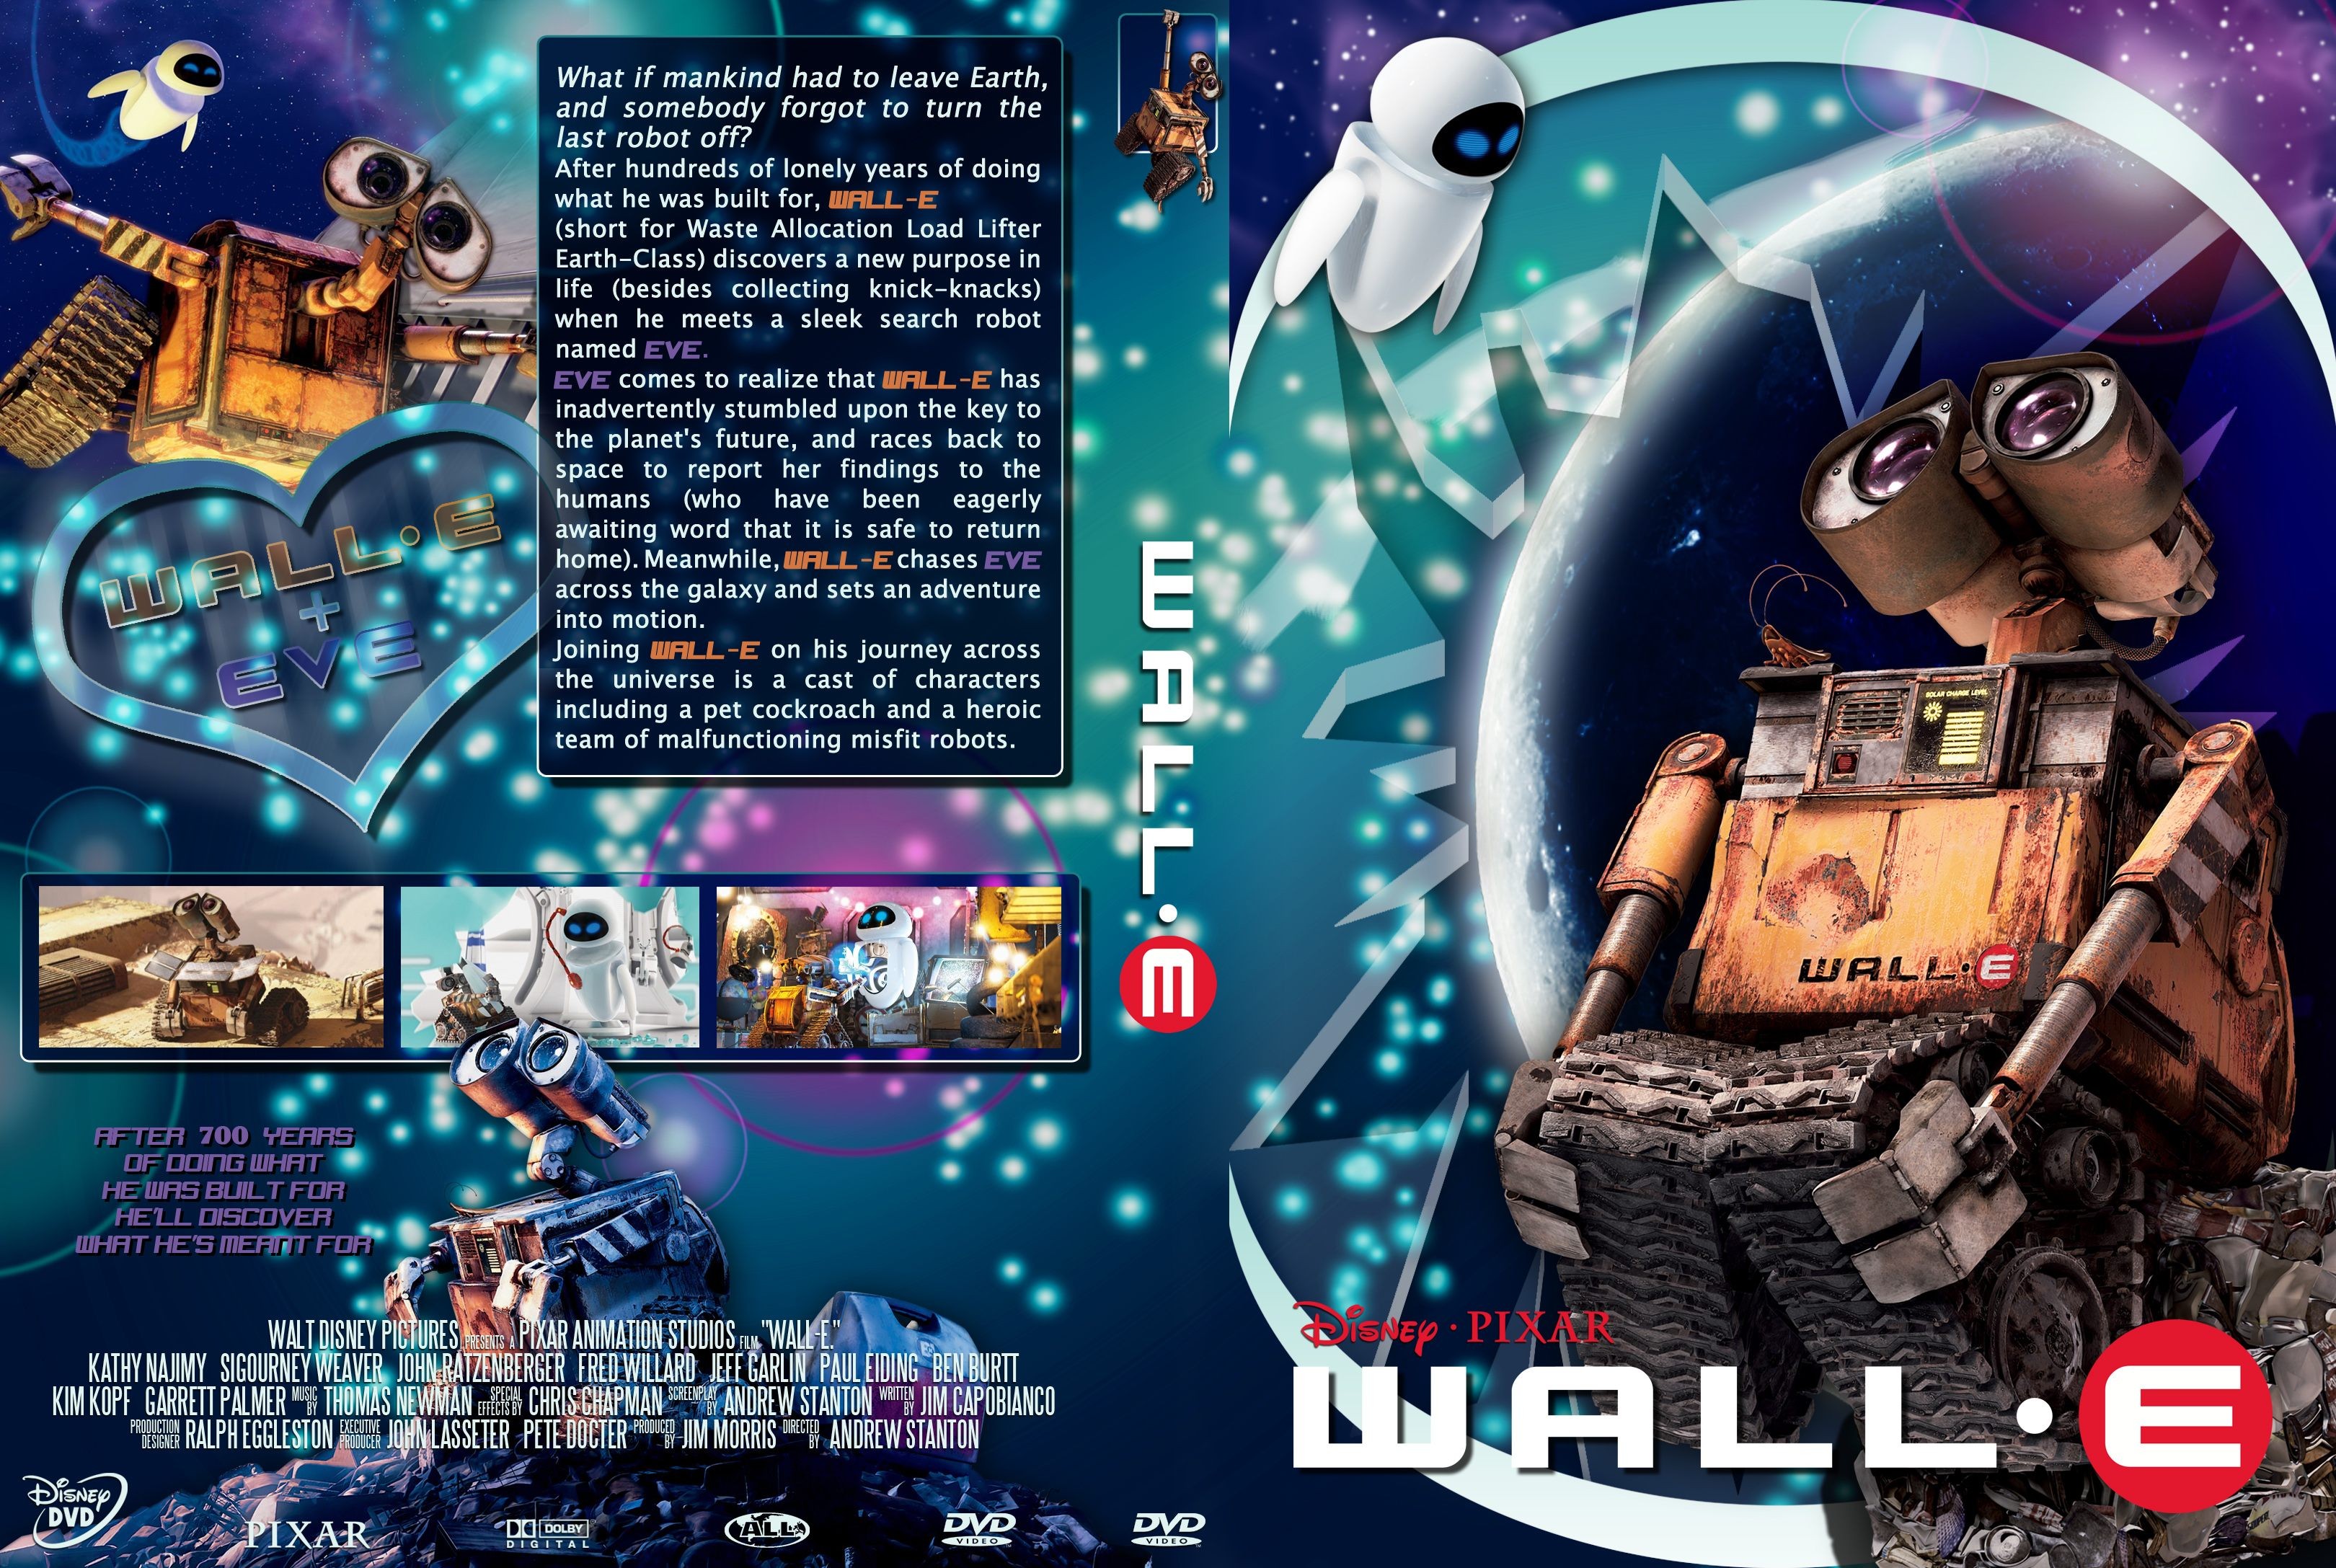 Covers Box Sk Wall E 08 High Quality Dvd Blueray Movie